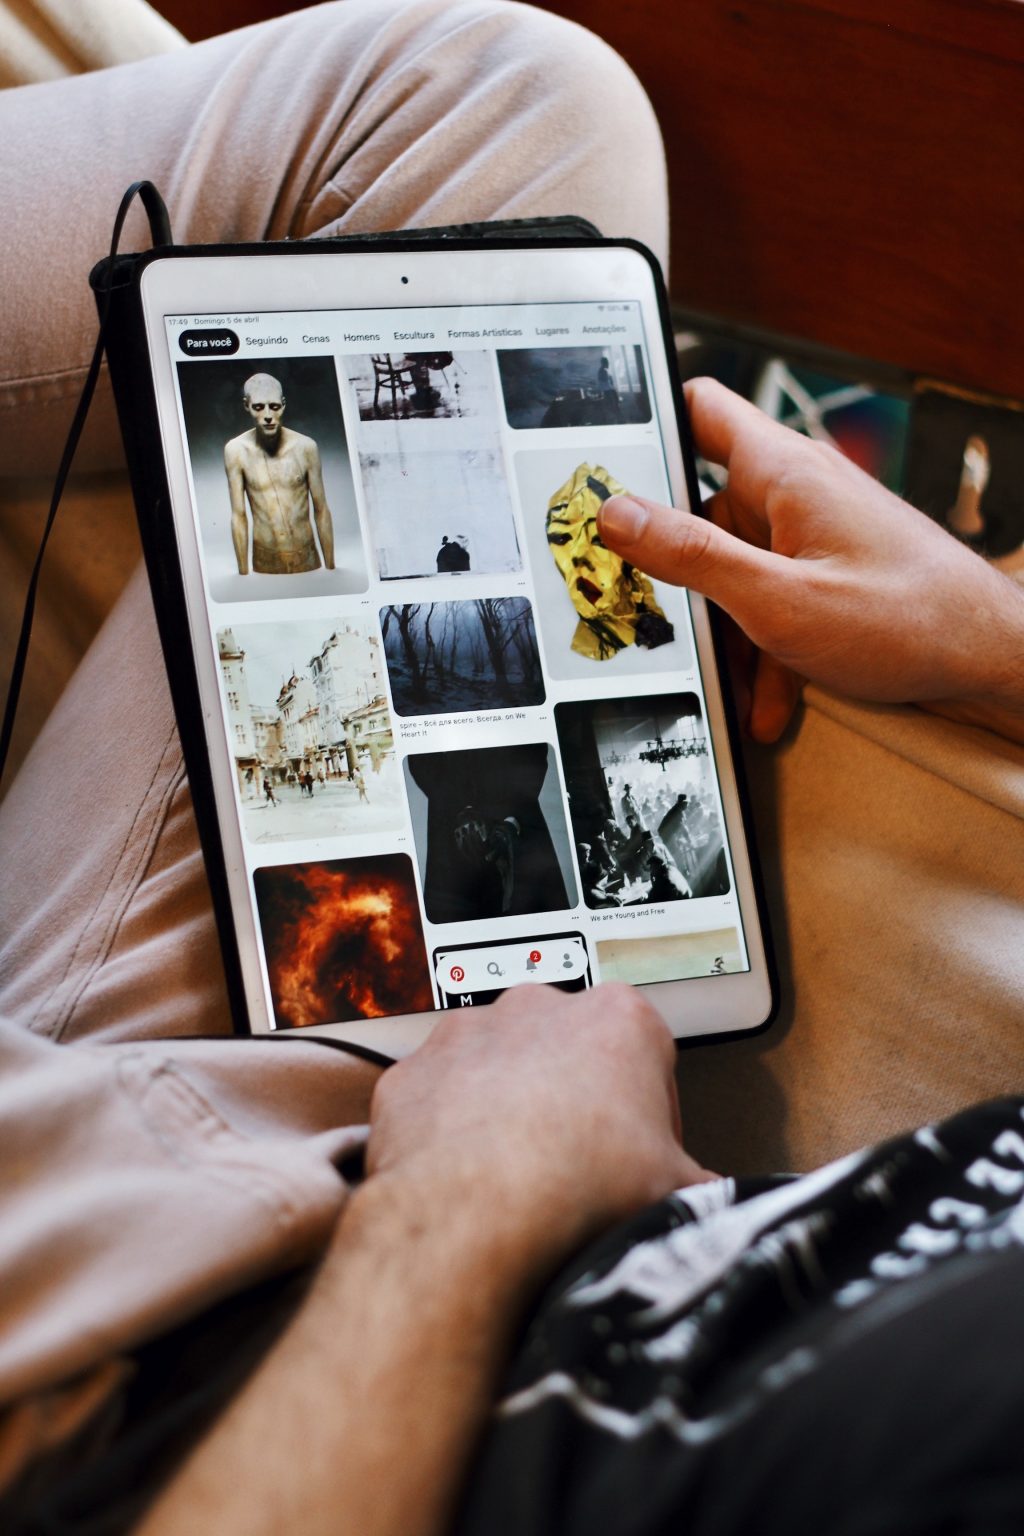 Everything You Need to Know About the Pinterest Algorithm